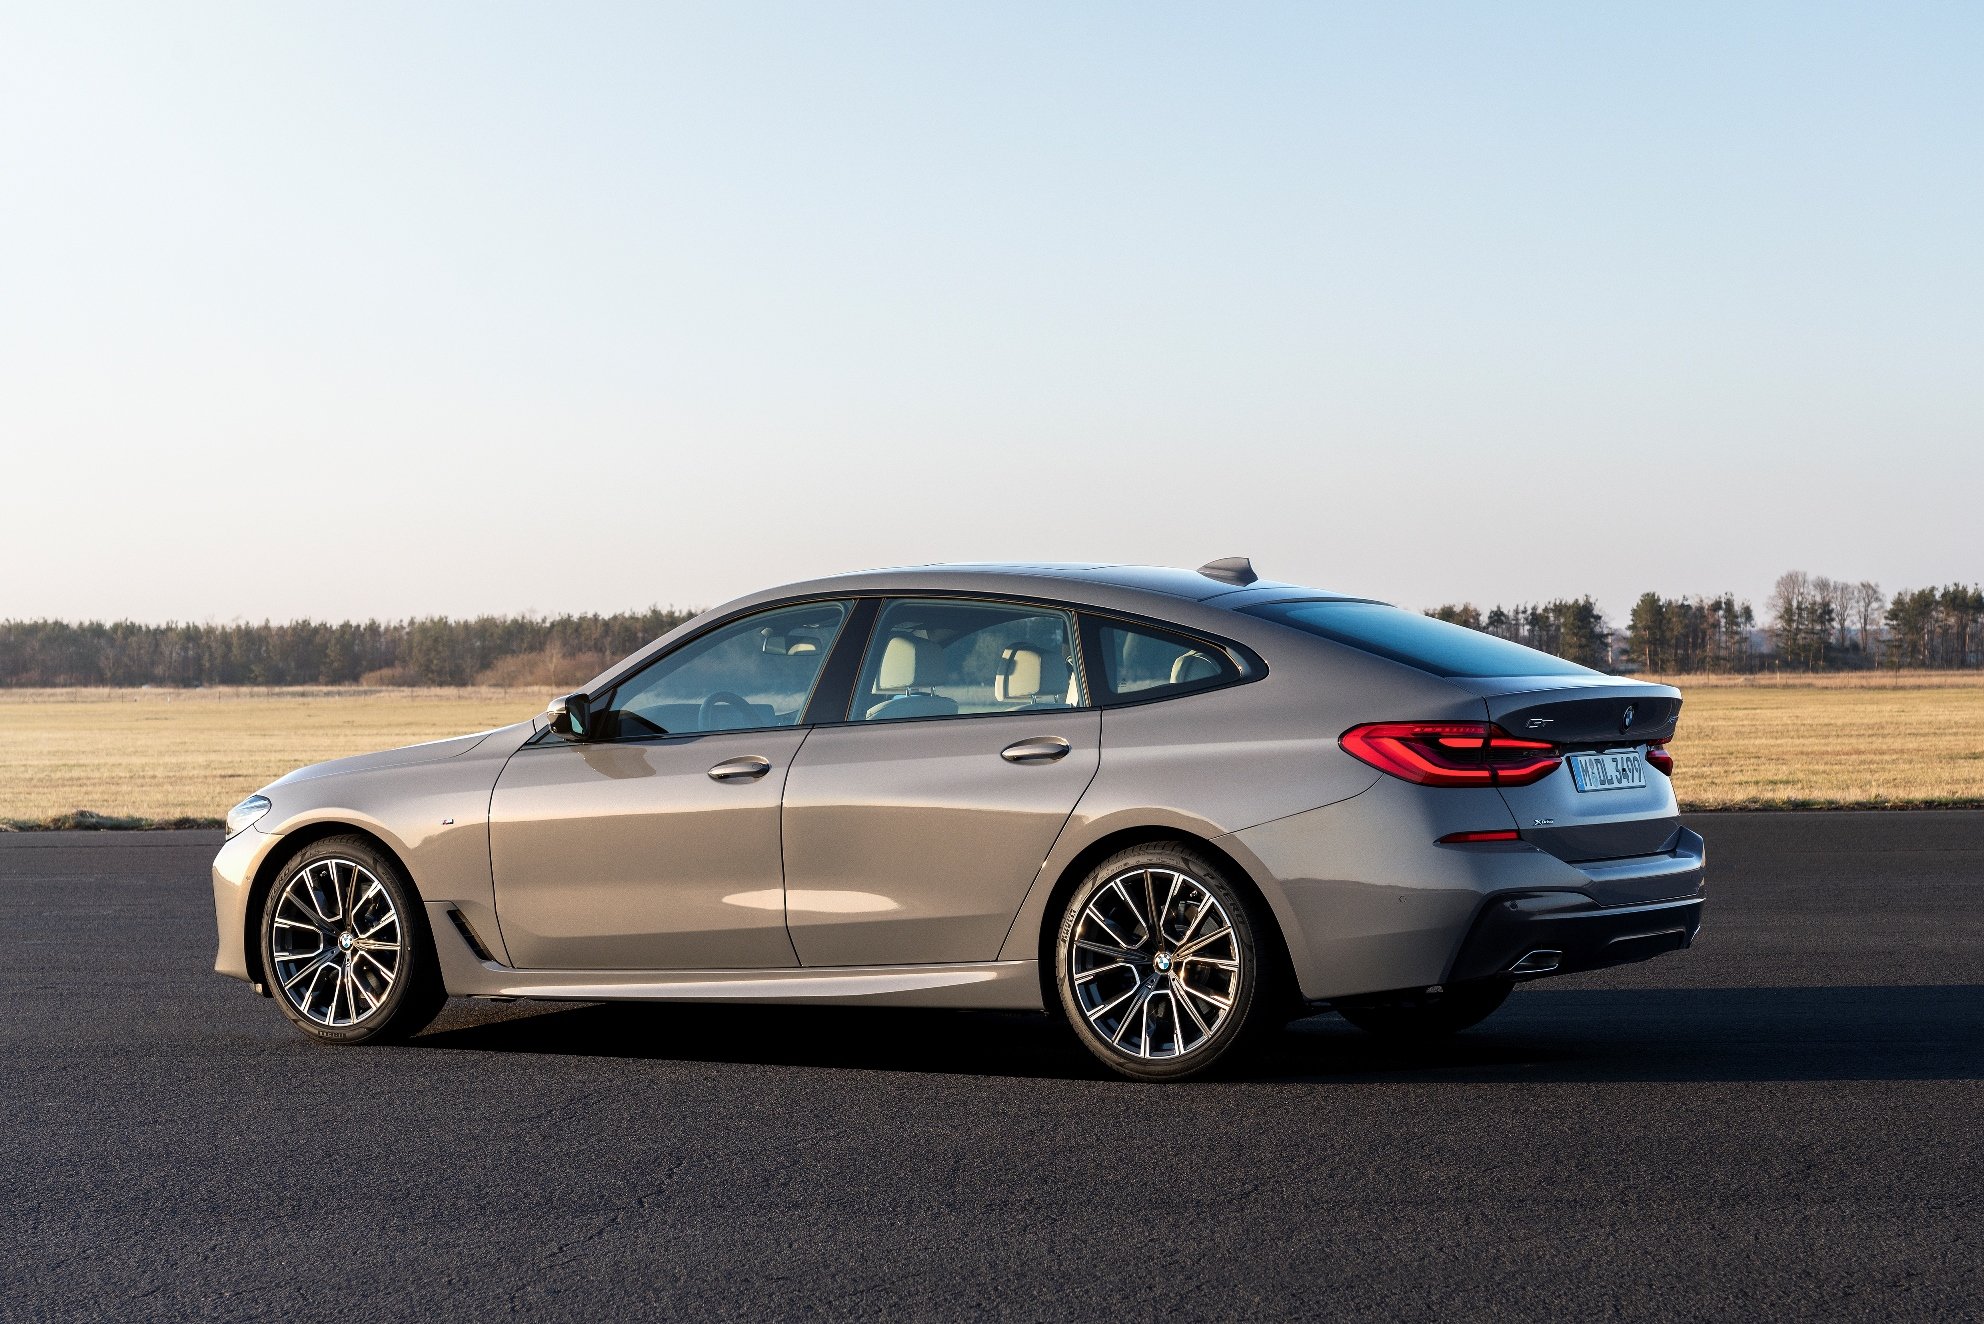 https://autoroad.cz/pictures/photo/2020/05/27/p90389863-highres-the-new-bmw-640i-xdr-3ef06c06e9.jpg